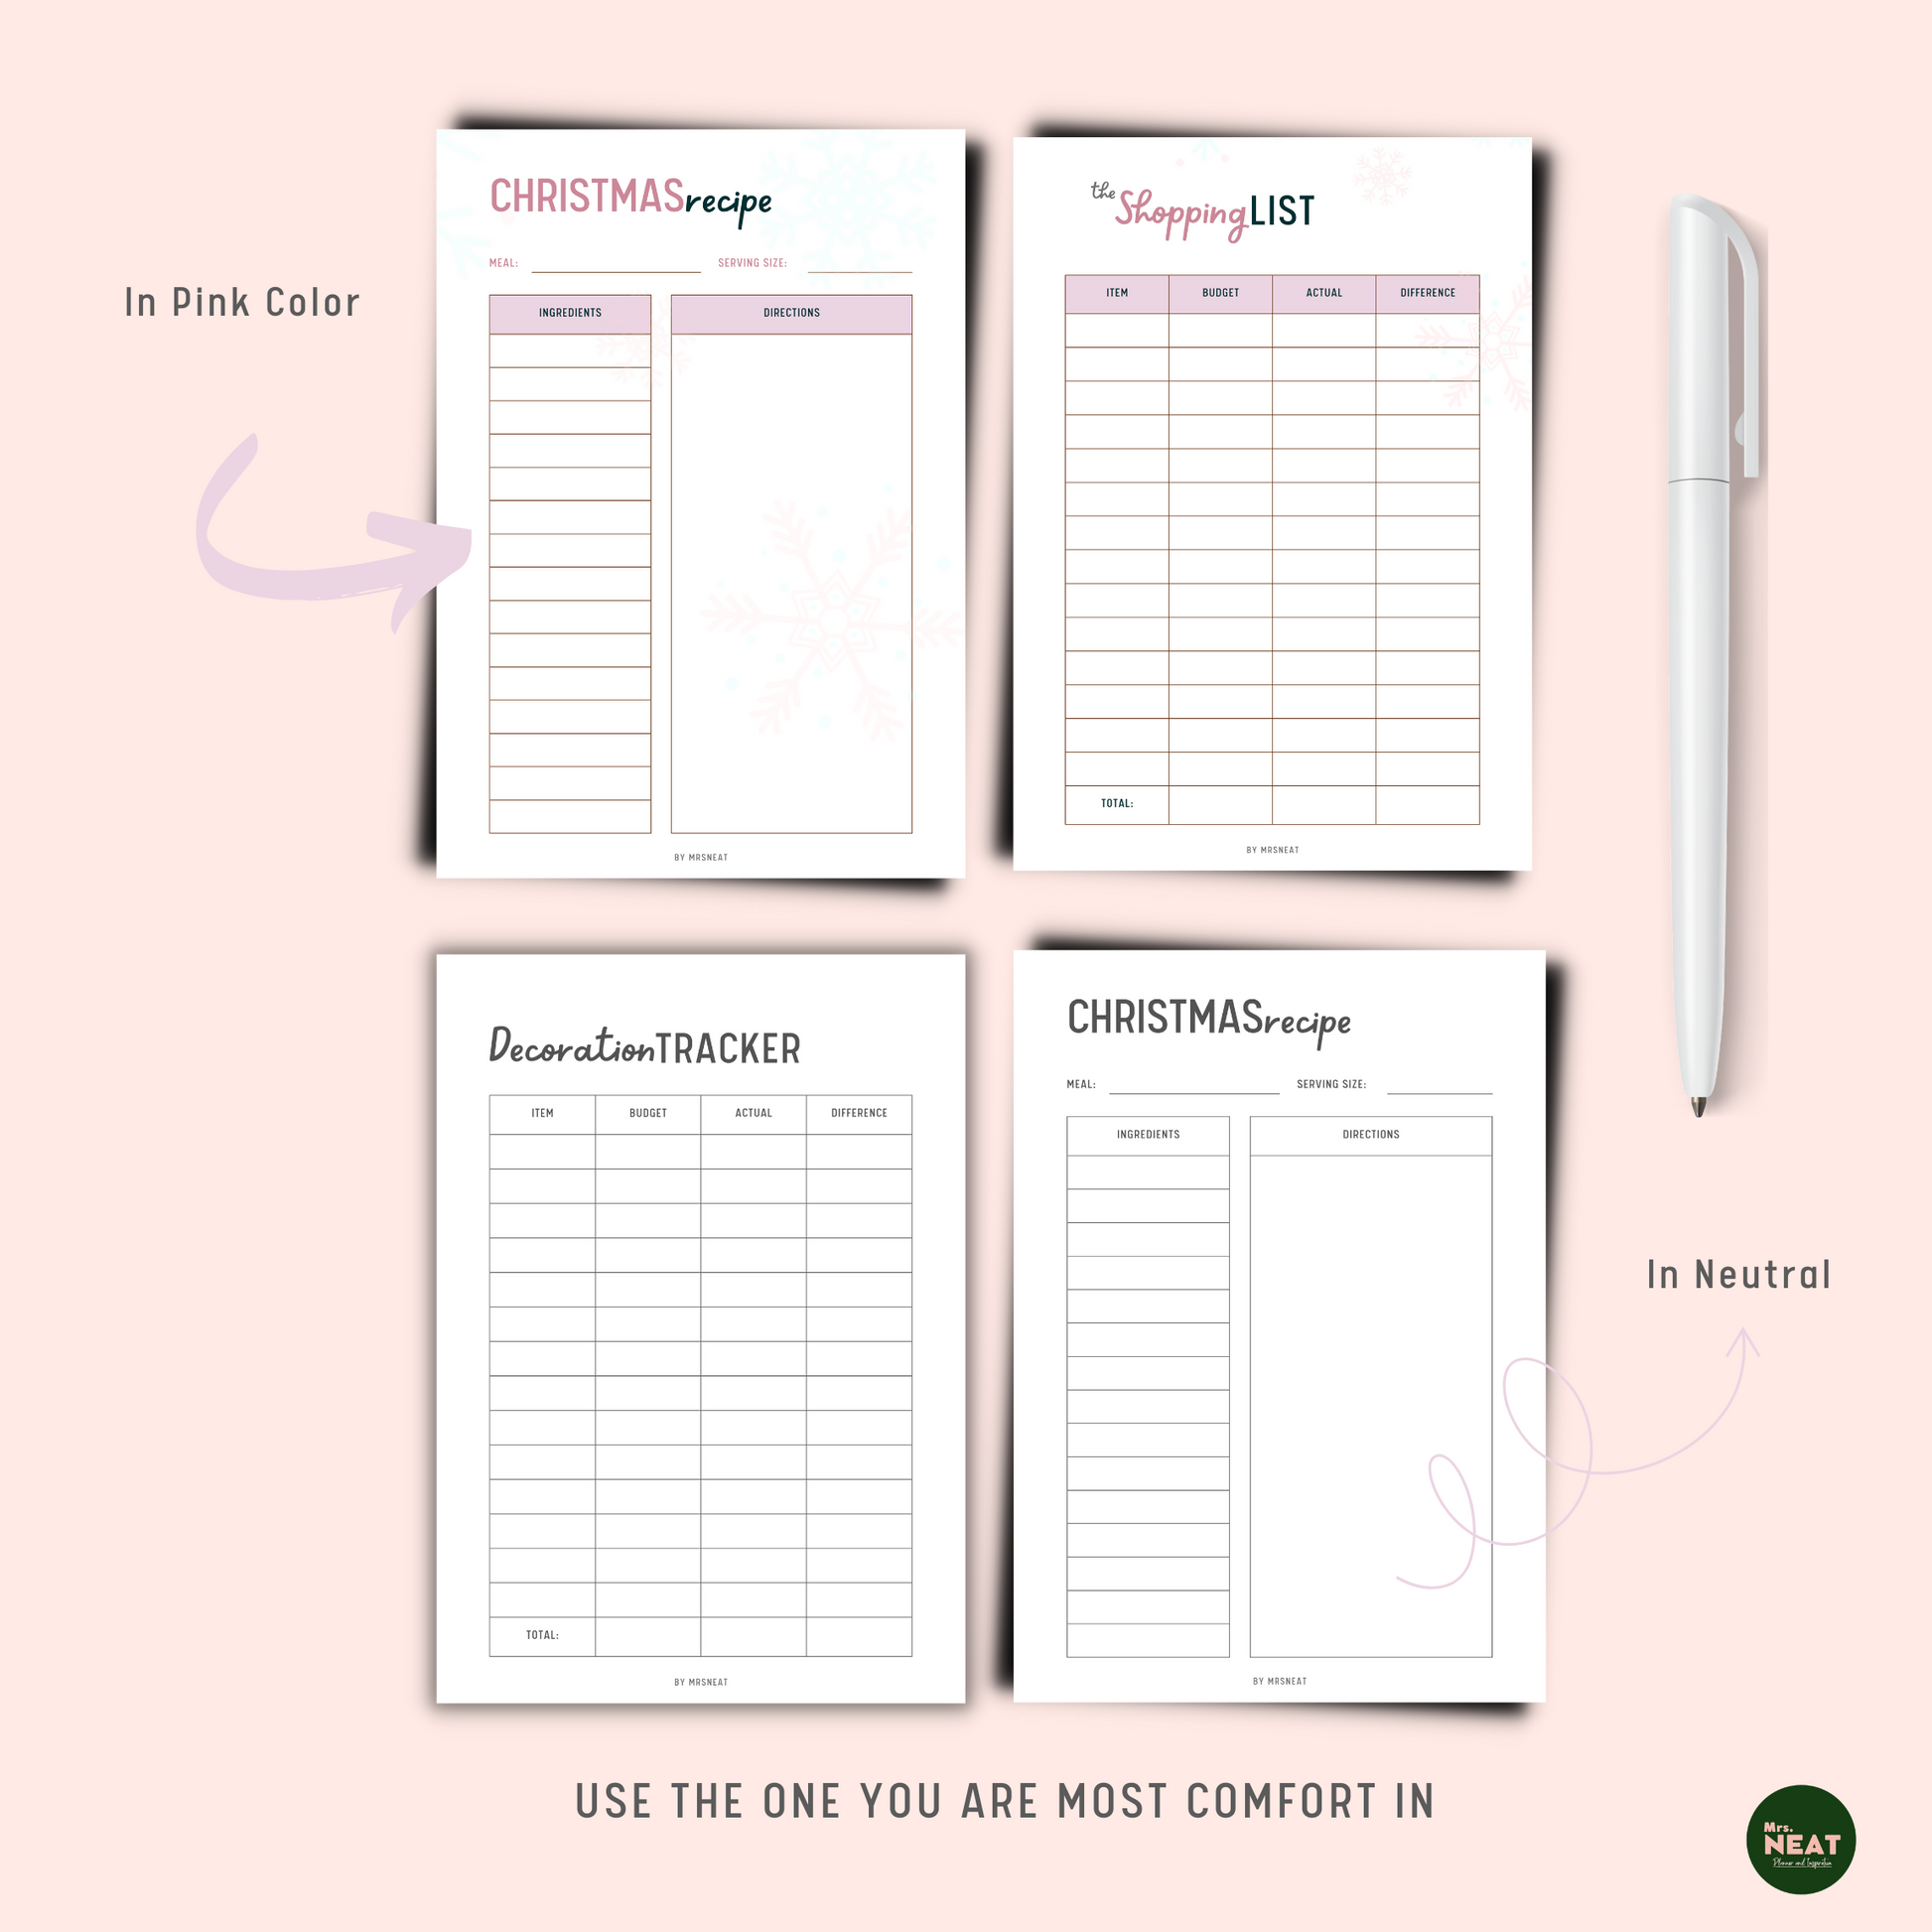 Christmas Recipe Planner, Shopping List Planner in Pink and Neutral Color